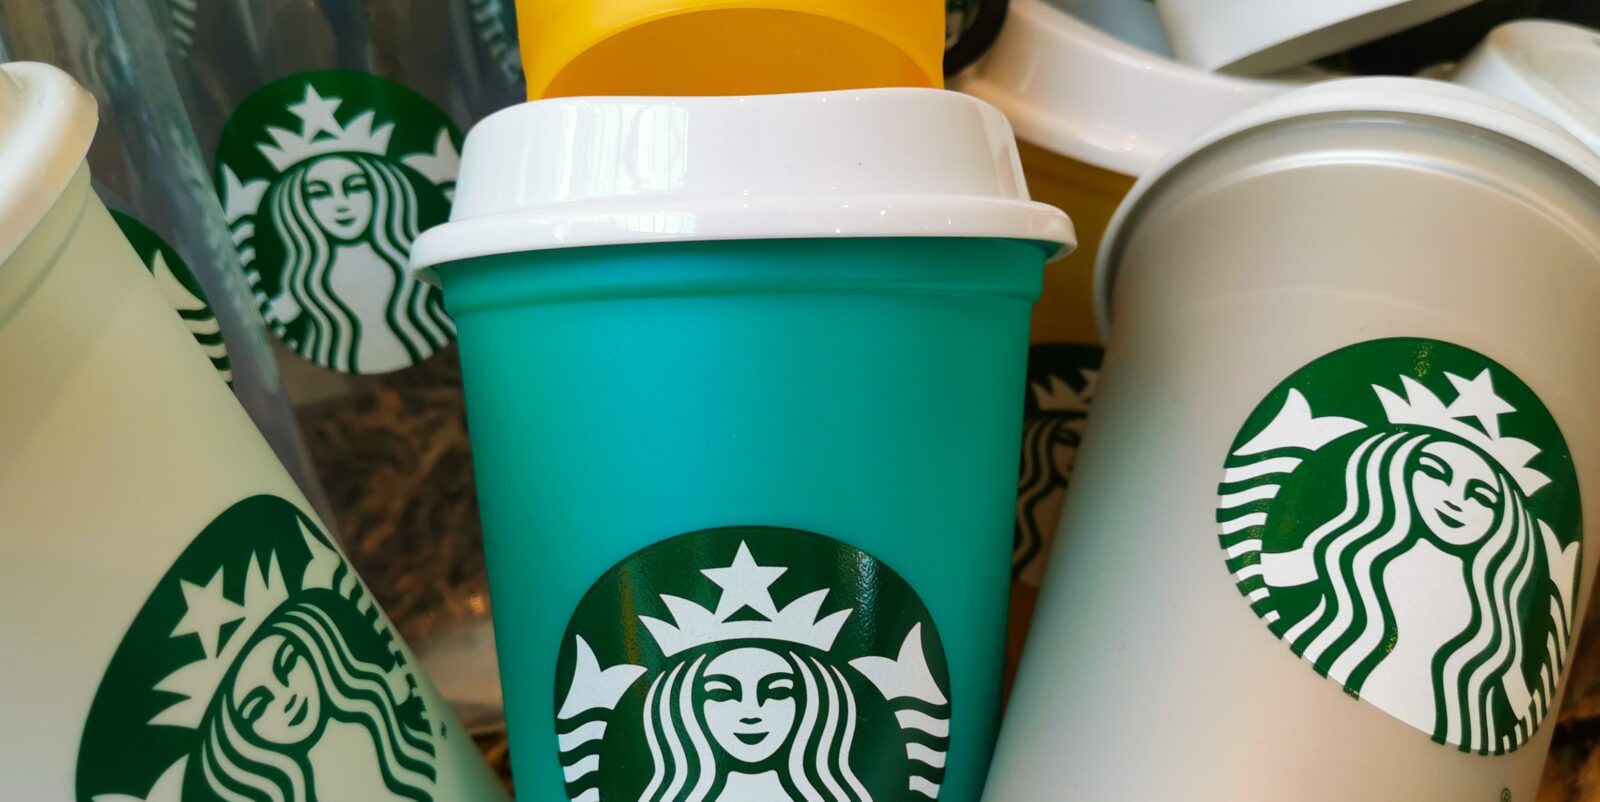 starbucks is accepting reusable cups for orders once again